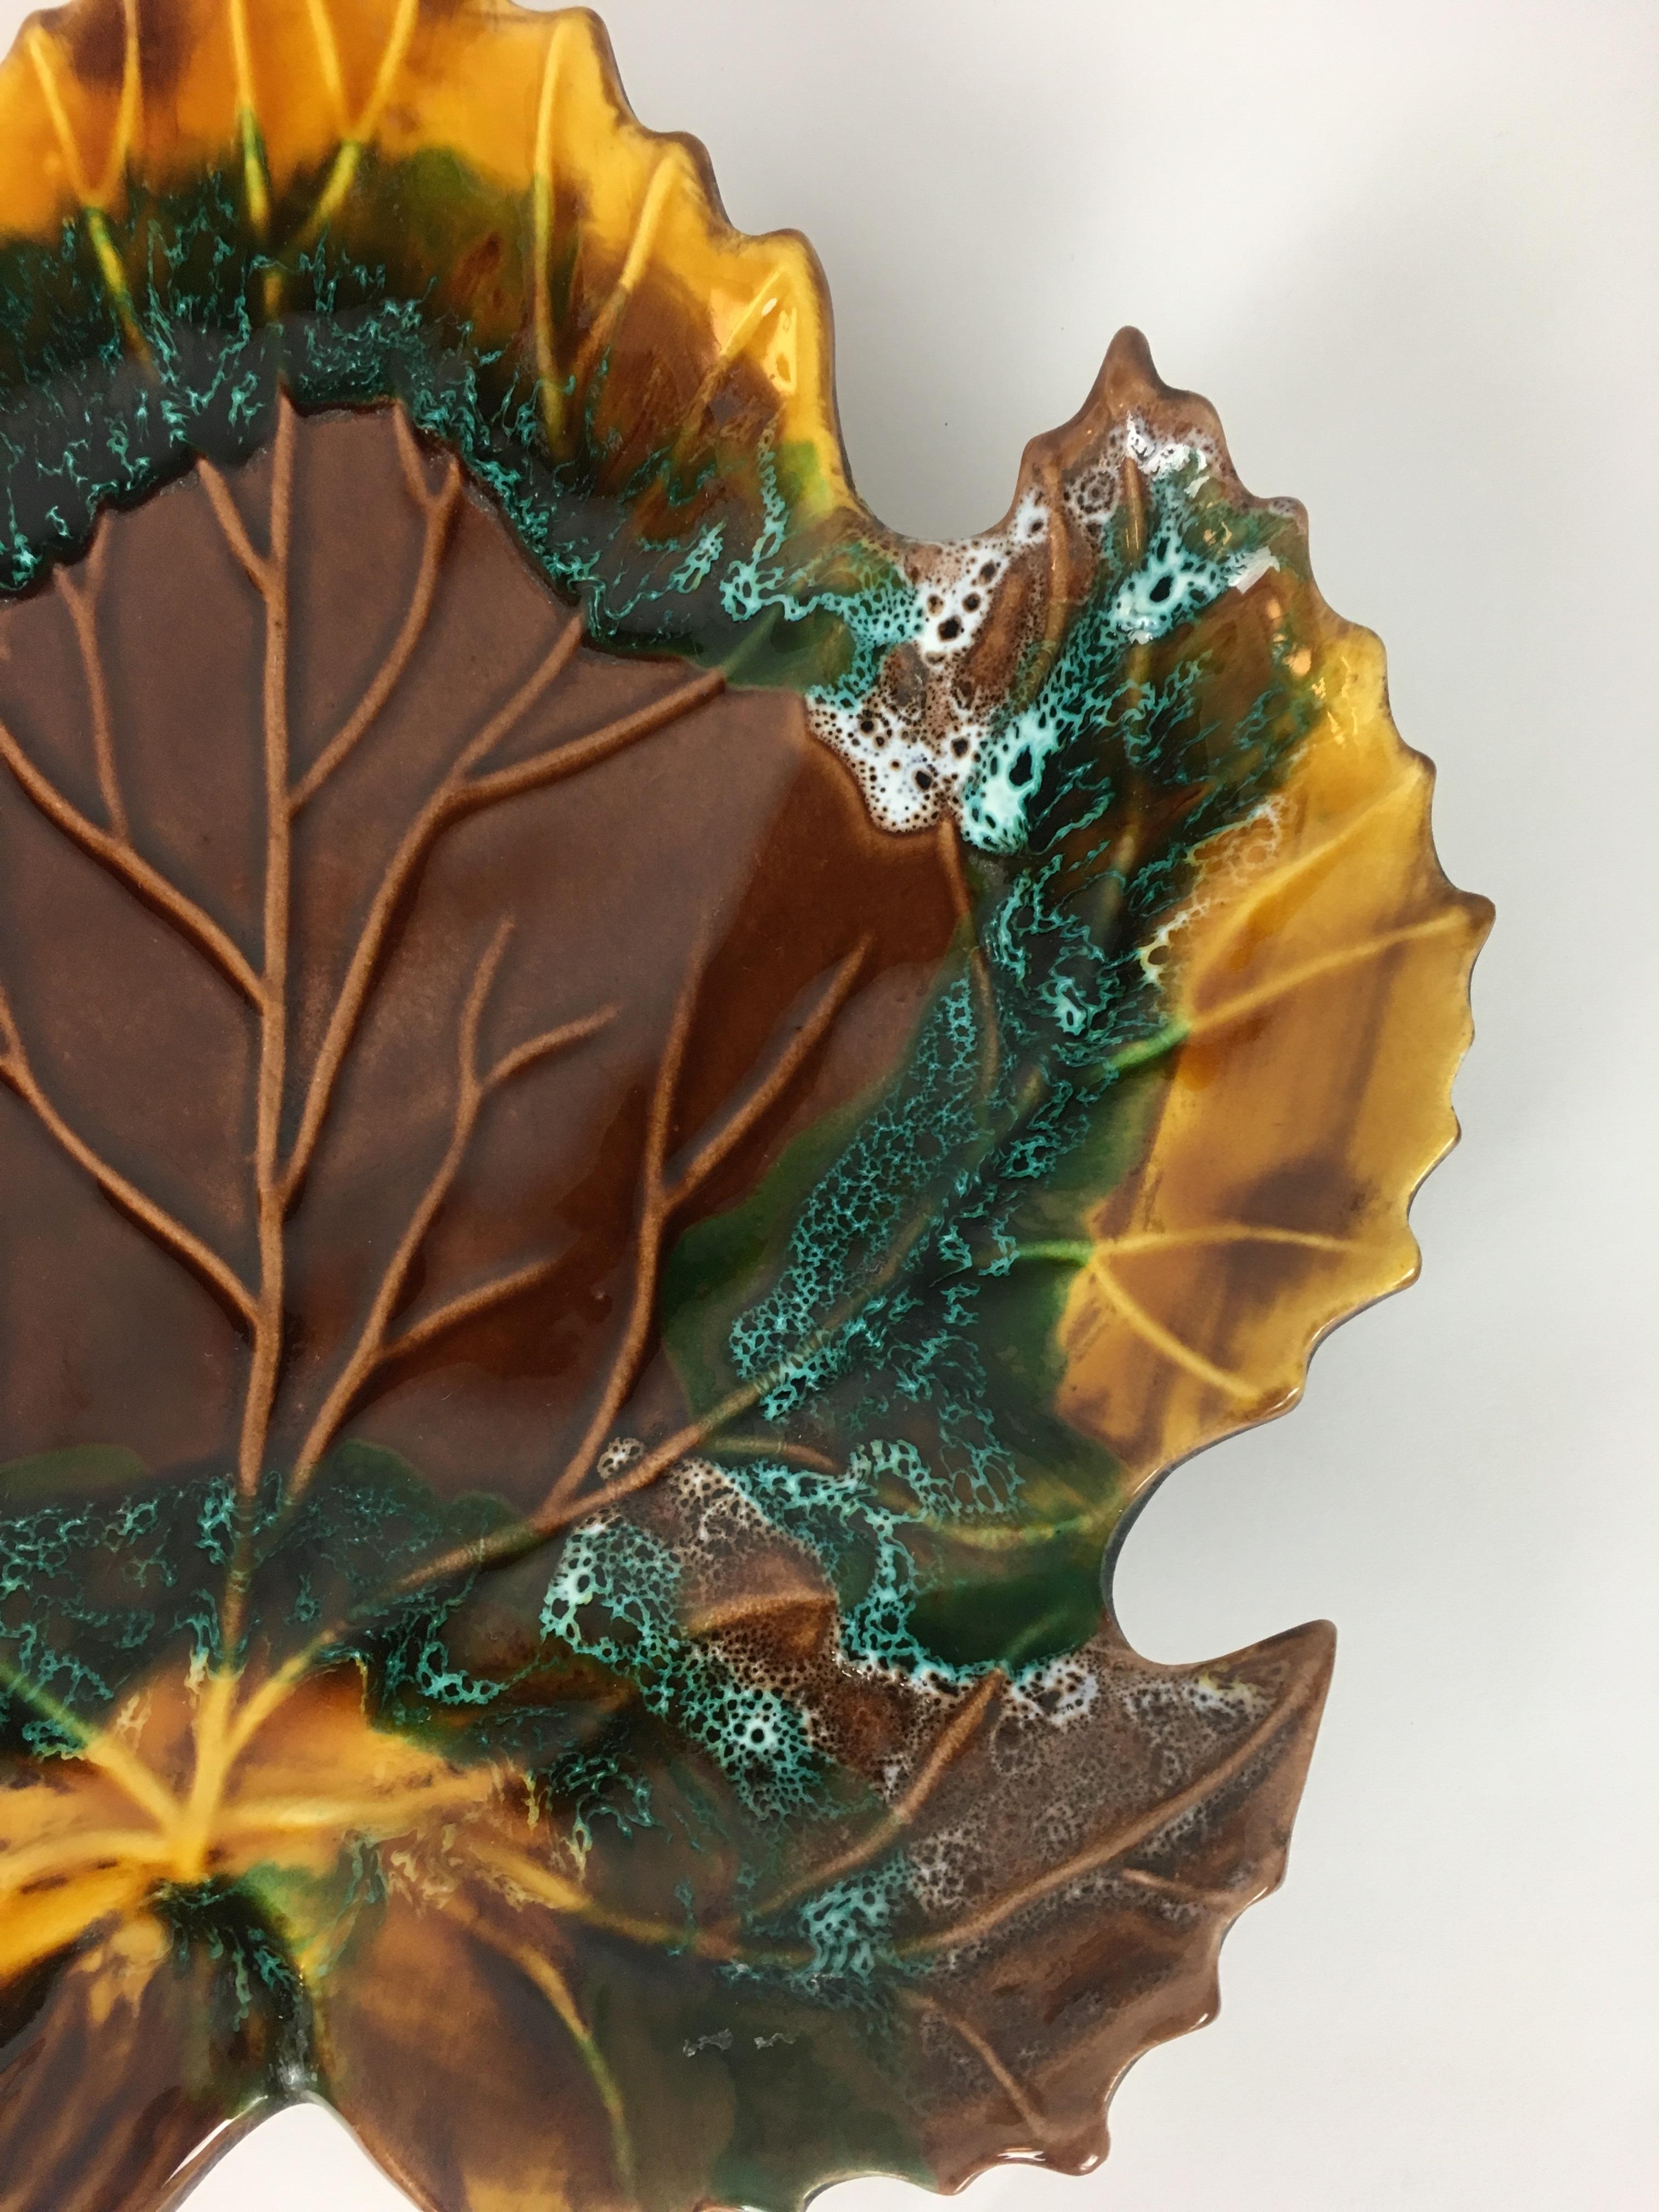 Impressive and colorful leaf shaped glazed ceramic platter, serving tray or centerpiece manufactured by Vallauris France, pottery makers, circa 1950s.

Useful as centerpiece, fruit or dessert platter and serving tray. Its generous size, design and